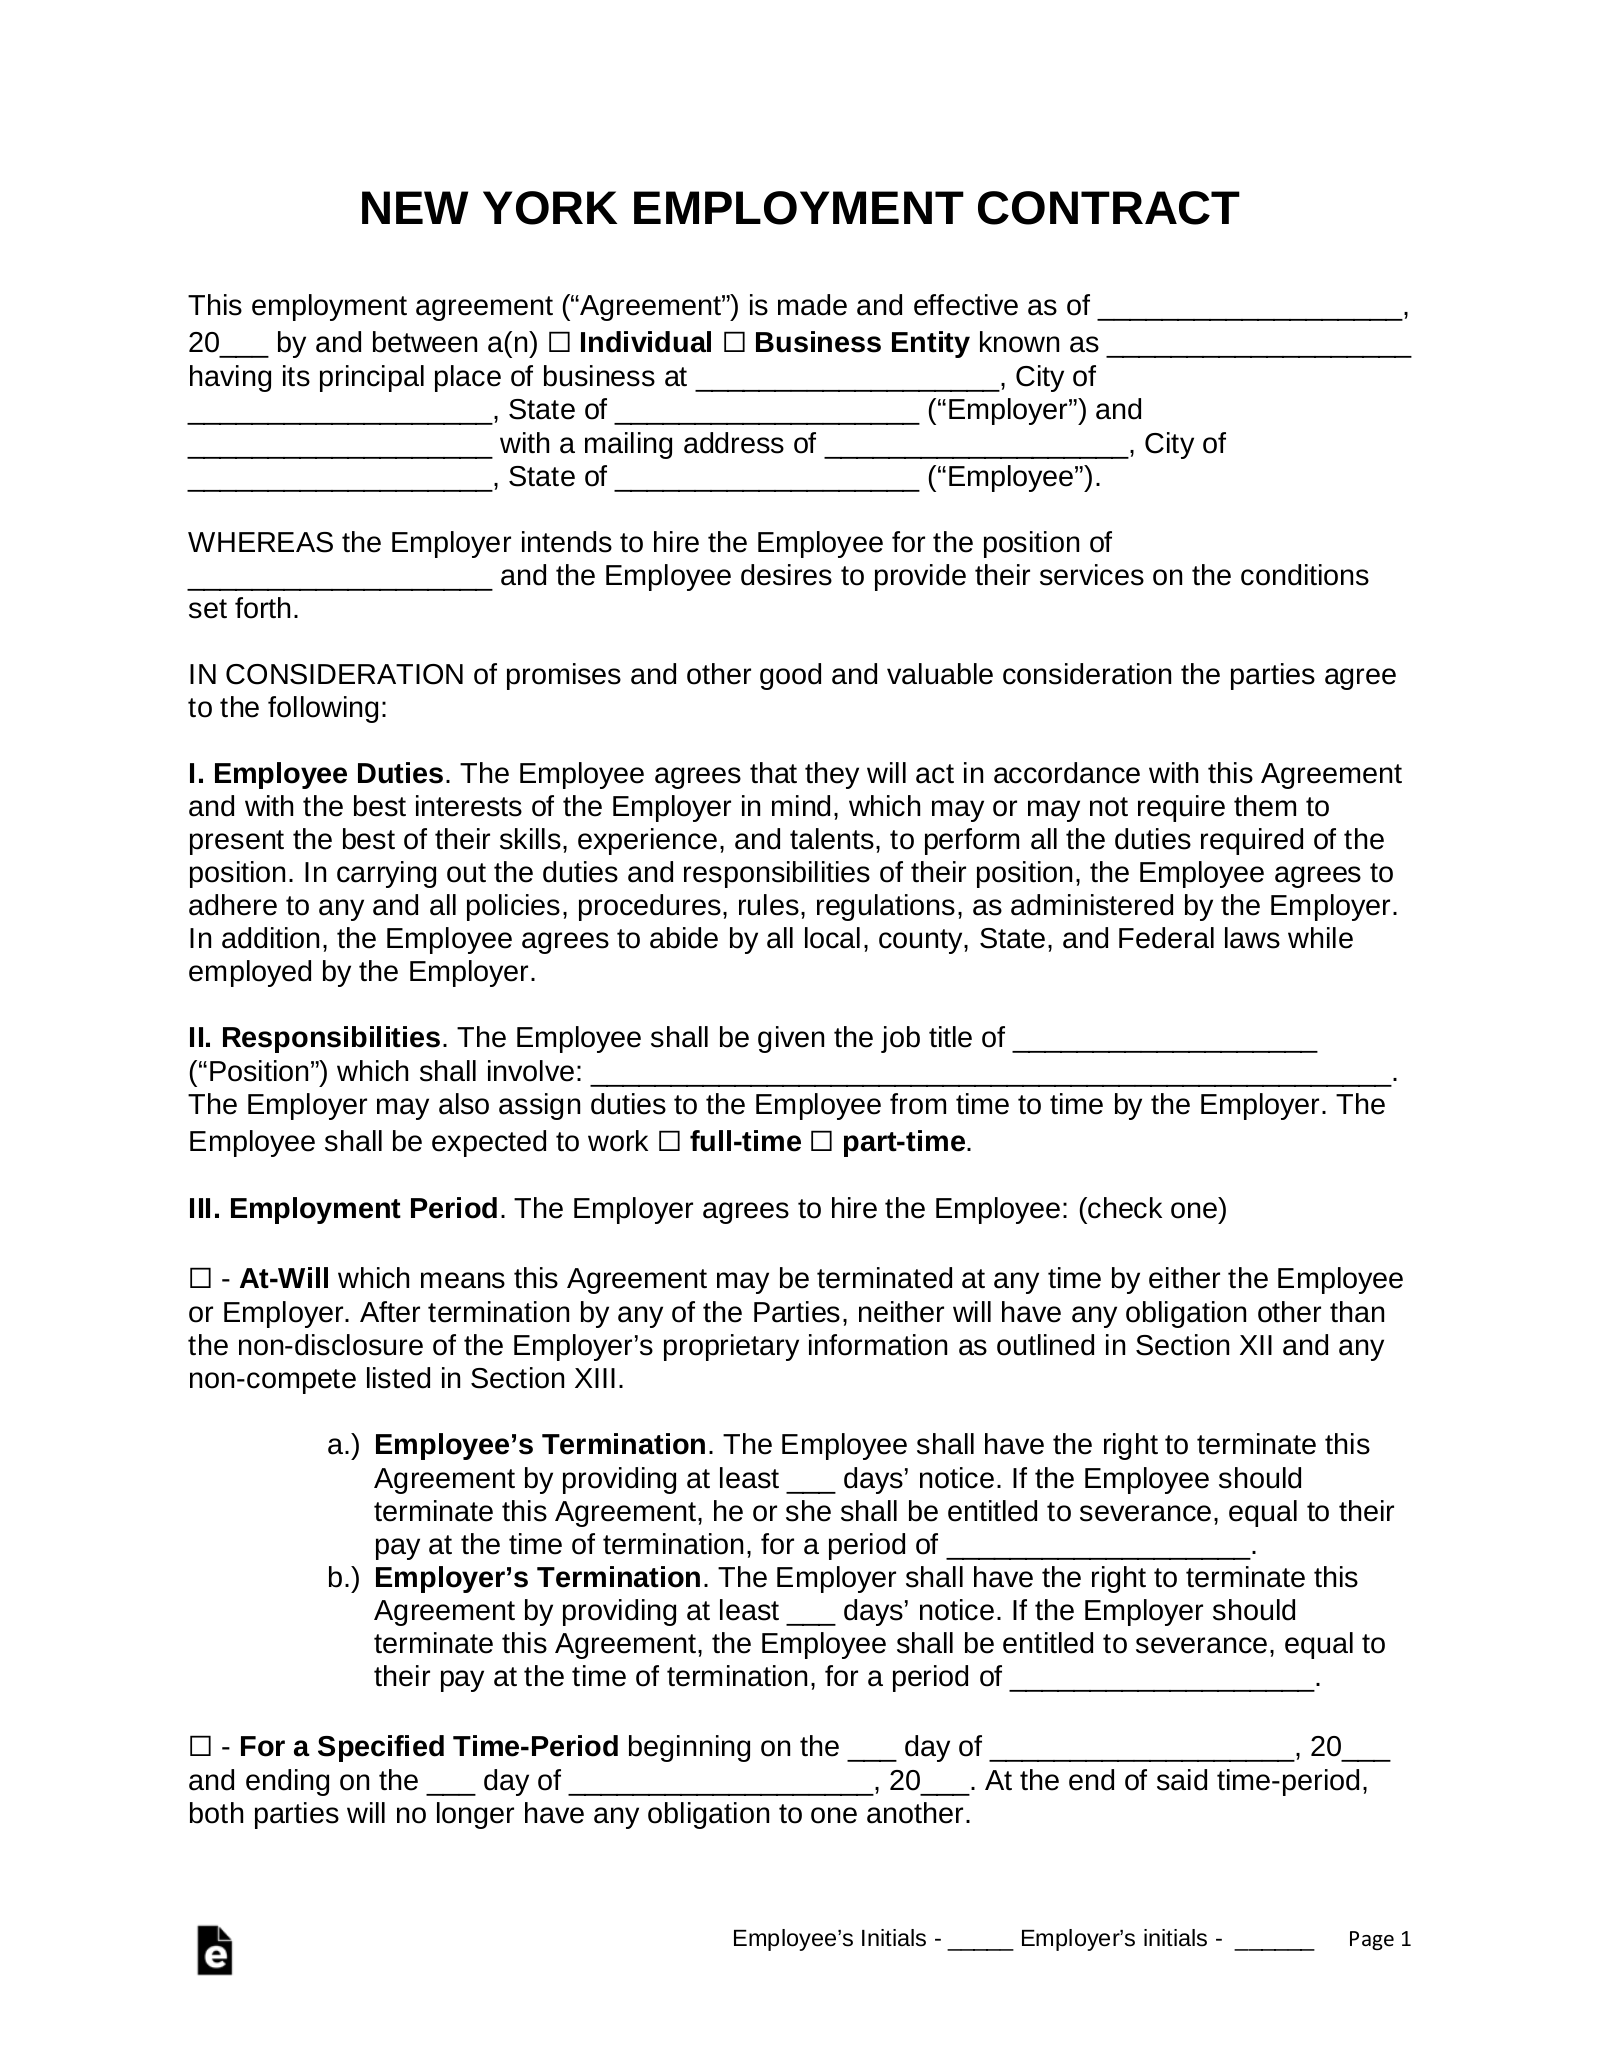 Free New York Employment Contract Templates 4 PDF Word EForms